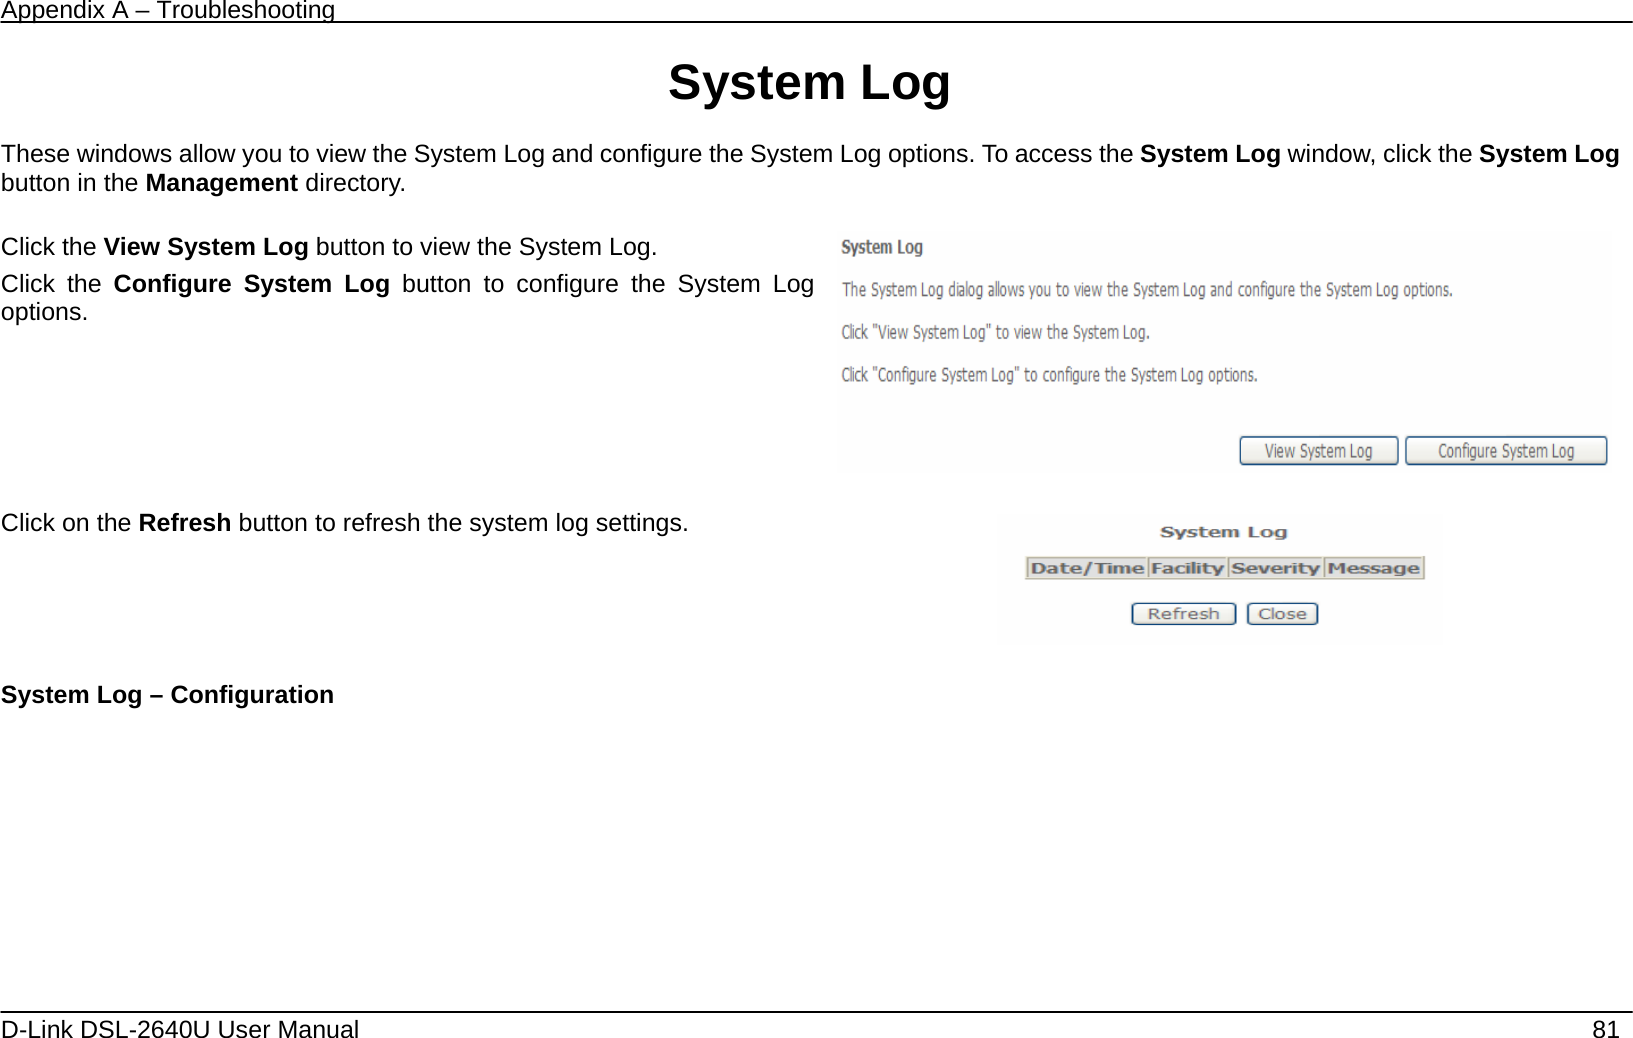 Appendix A – Troubleshooting   D-Link DSL-2640U User Manual    81 System Log  These windows allow you to view the System Log and configure the System Log options. To access the System Log window, click the System Log button in the Management directory.  Click the View System Log button to view the System Log. Click the Configure System Log button to configure the System Log options.     Click on the Refresh button to refresh the system log settings.   System Log – Configuration 